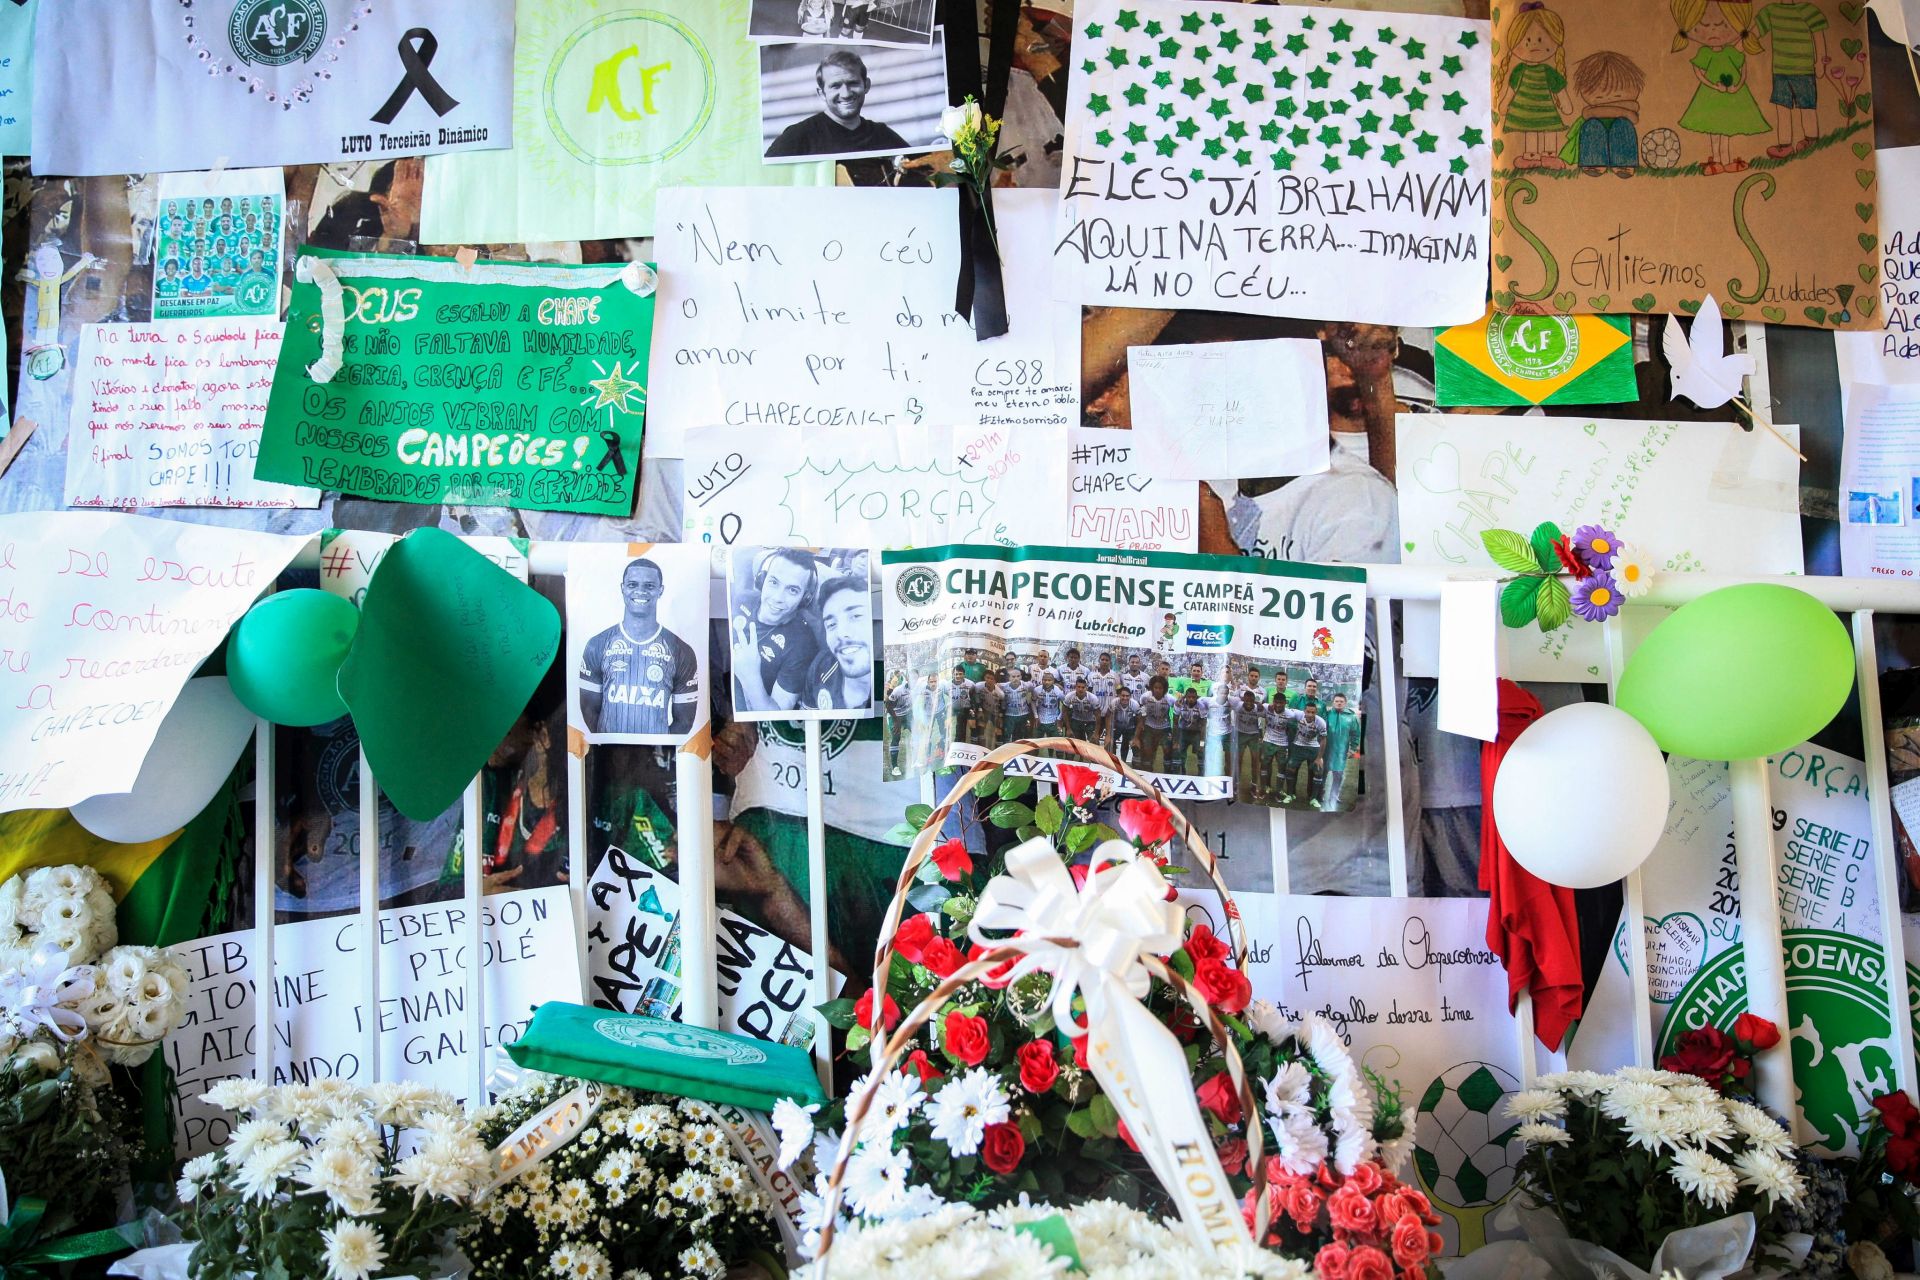 epa05655712 View of the posters, pictures, letters and flowers in honor to the players of the Brazilian soccer team Chapecoense, who died in a plane crash in Colombia, in the Arena Conda stadium of the Chapecoense club in Chapeco, Brazil, 01 December 2016.  EPA/FERNANDO BIZERRA JR